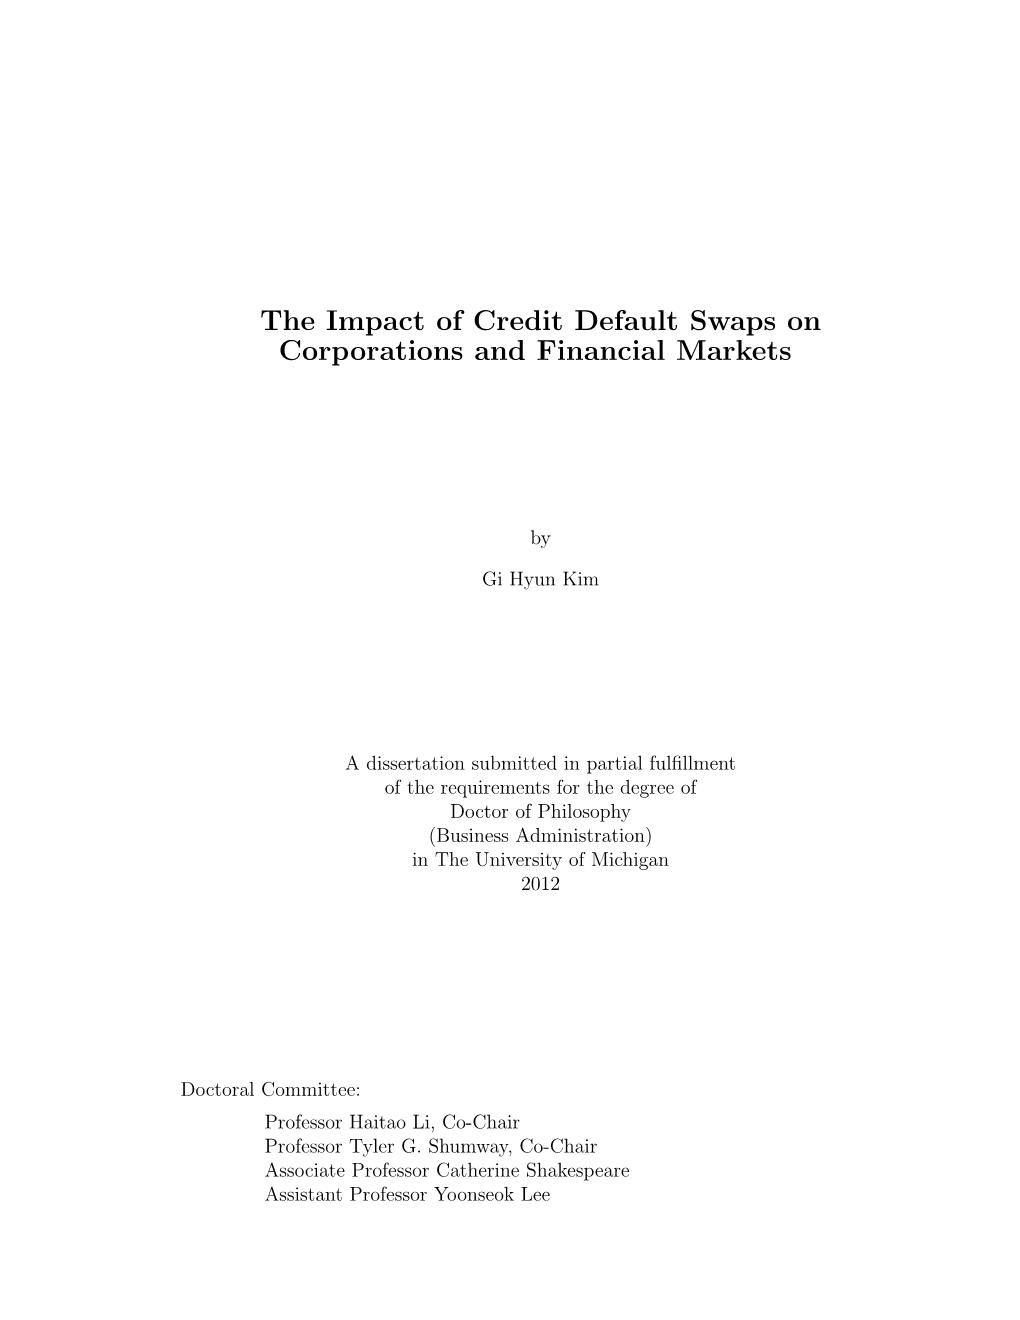 The Impact of Credit Default Swaps on Corporations and Financial Markets